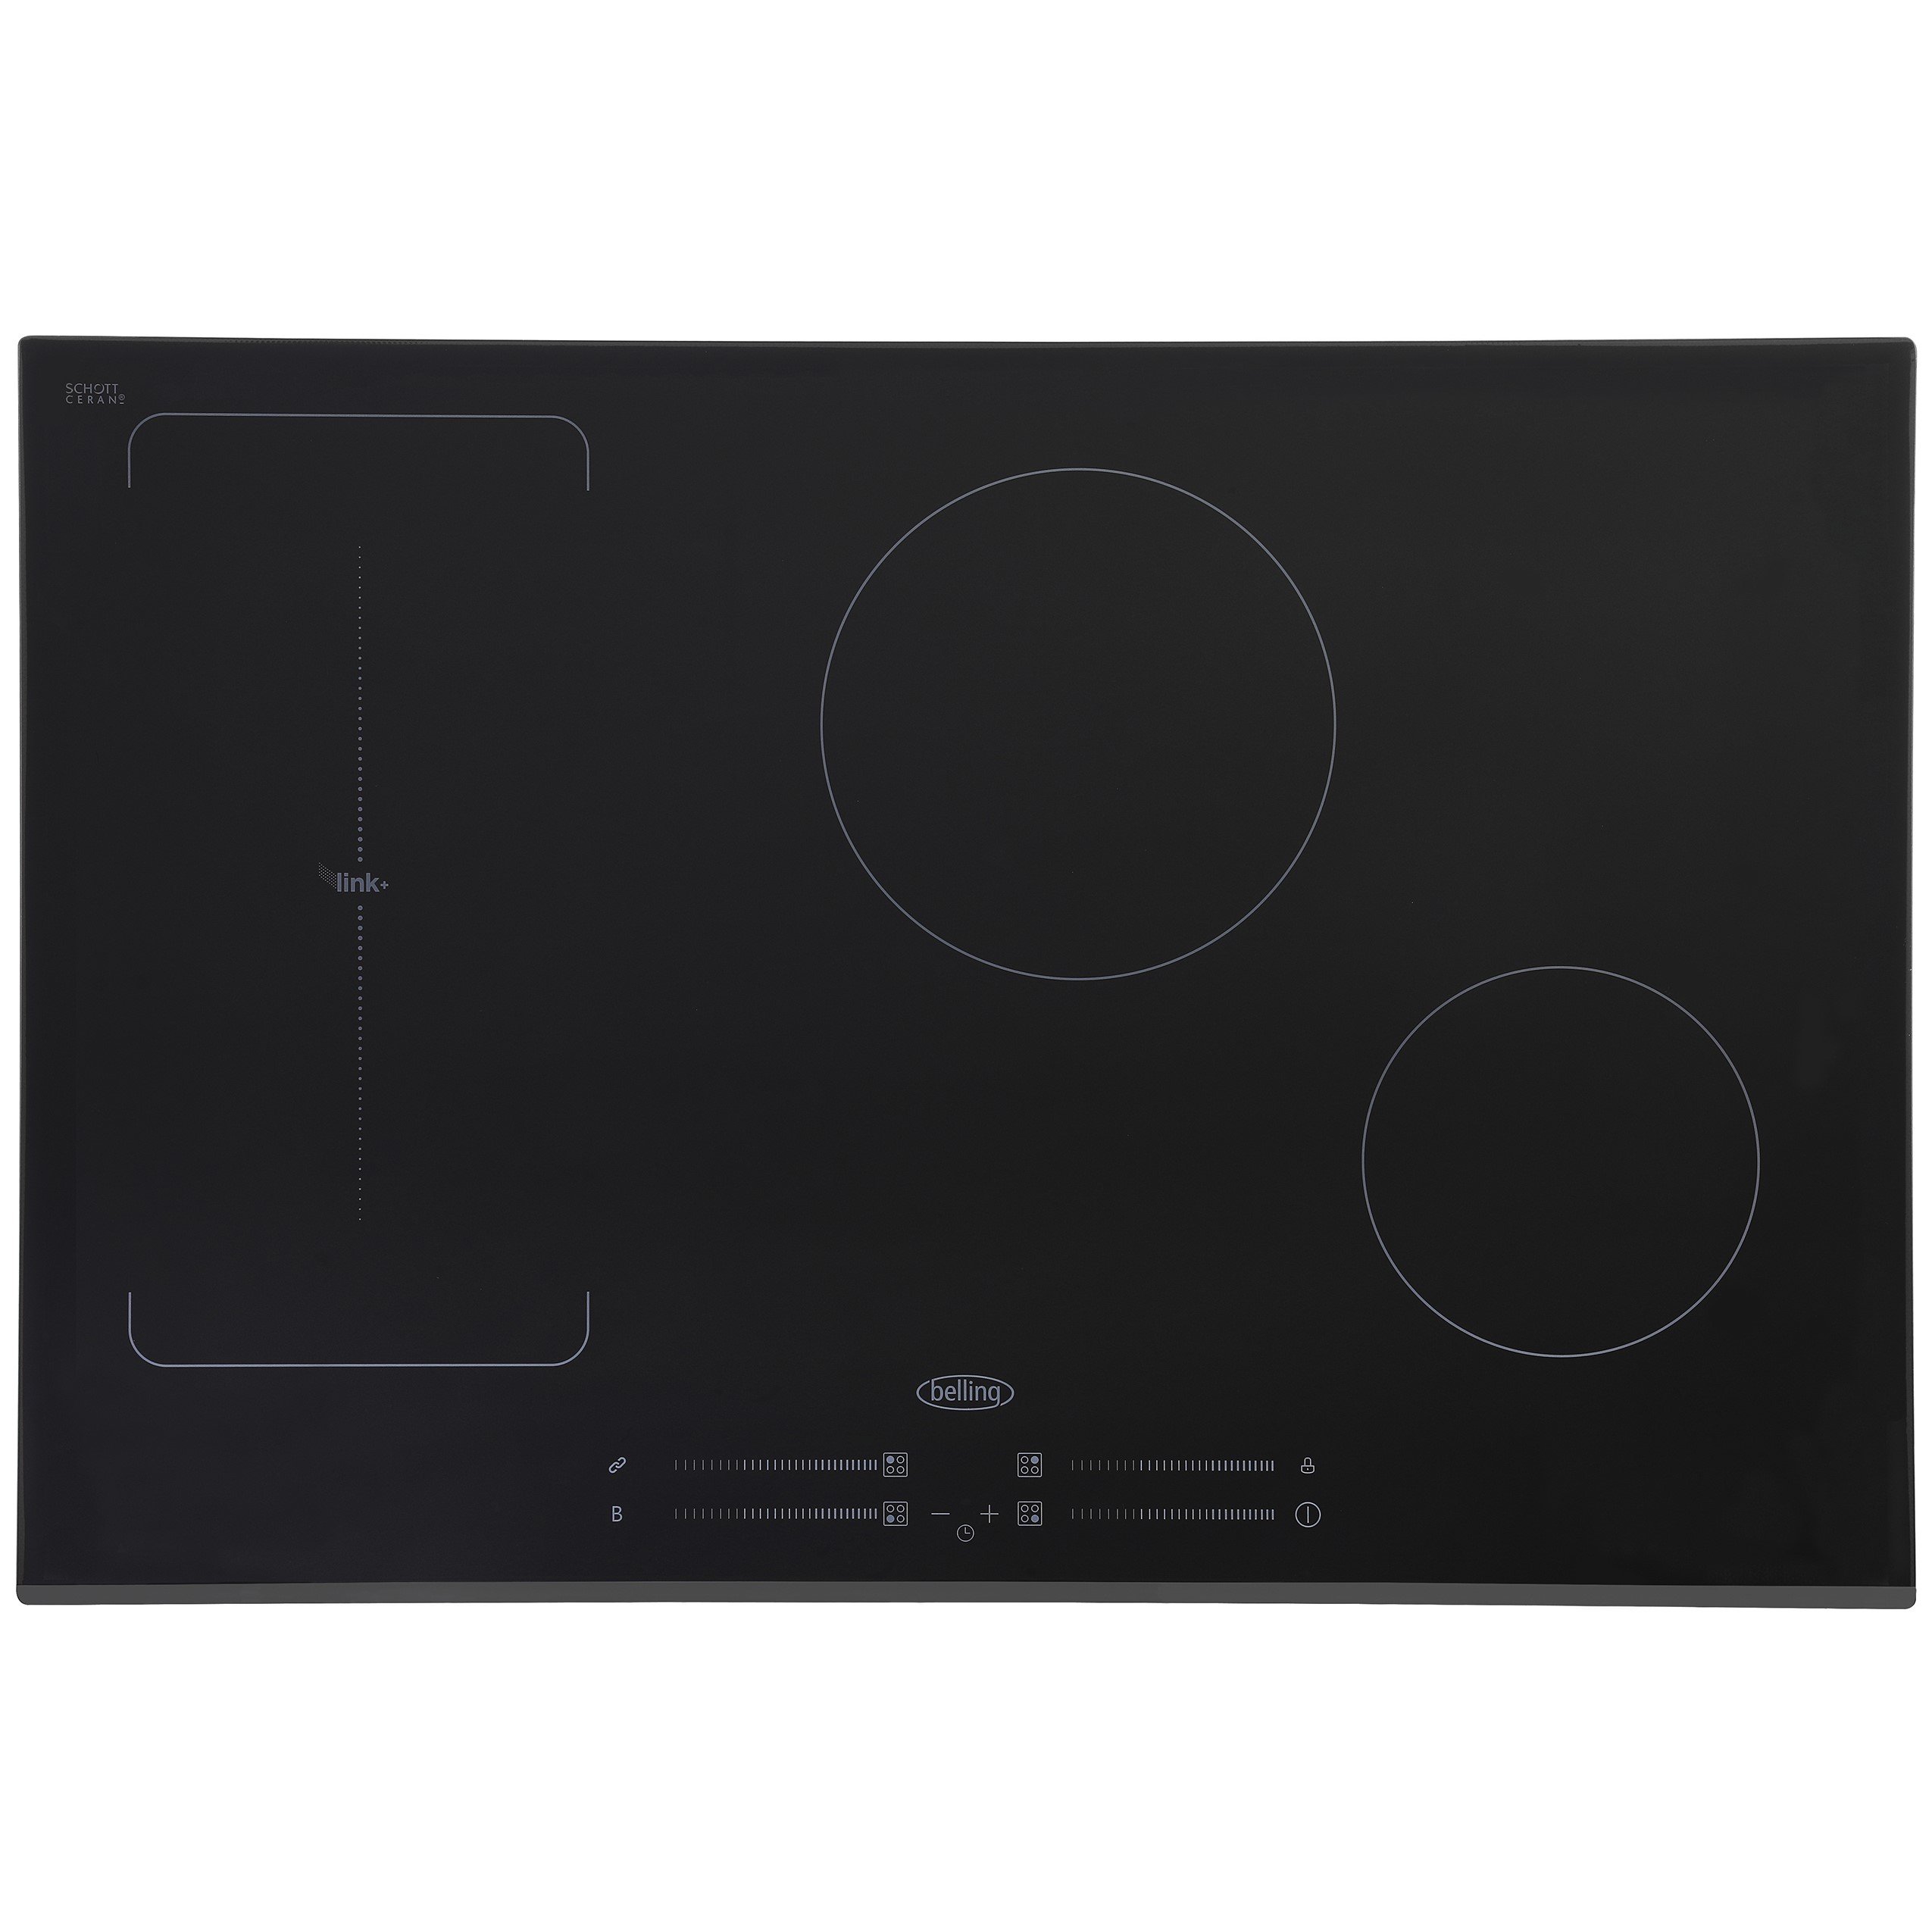 77cm touch control induction hob with nine power levels, Link+, timer, child lock & pan detection